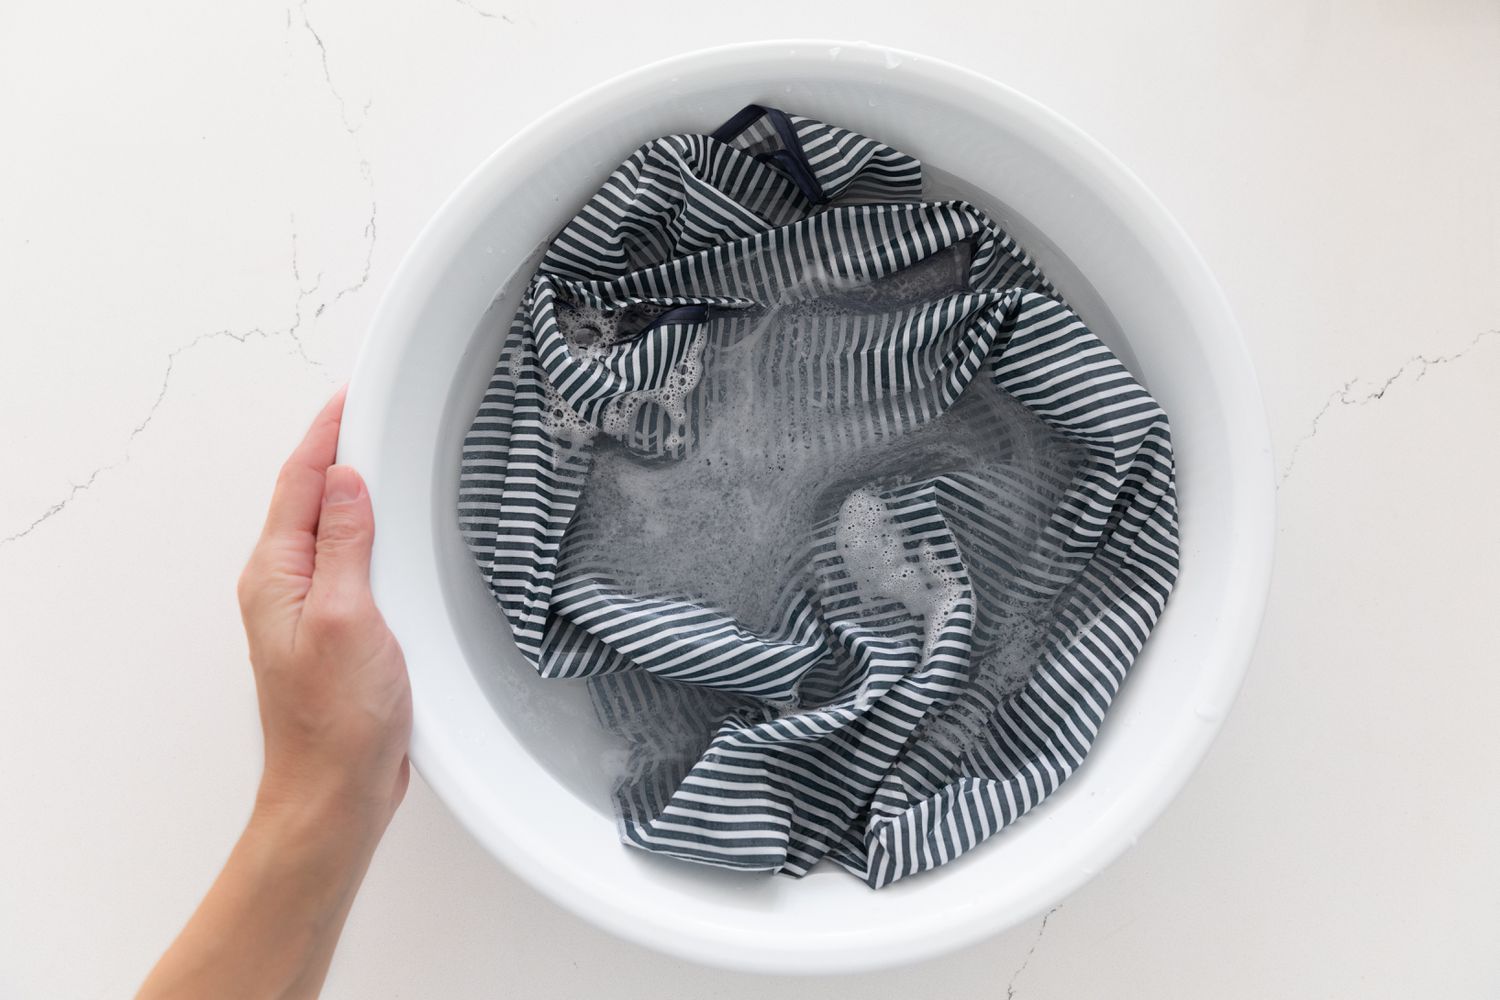 Nylon reusable bag being washed by hand in soapy water